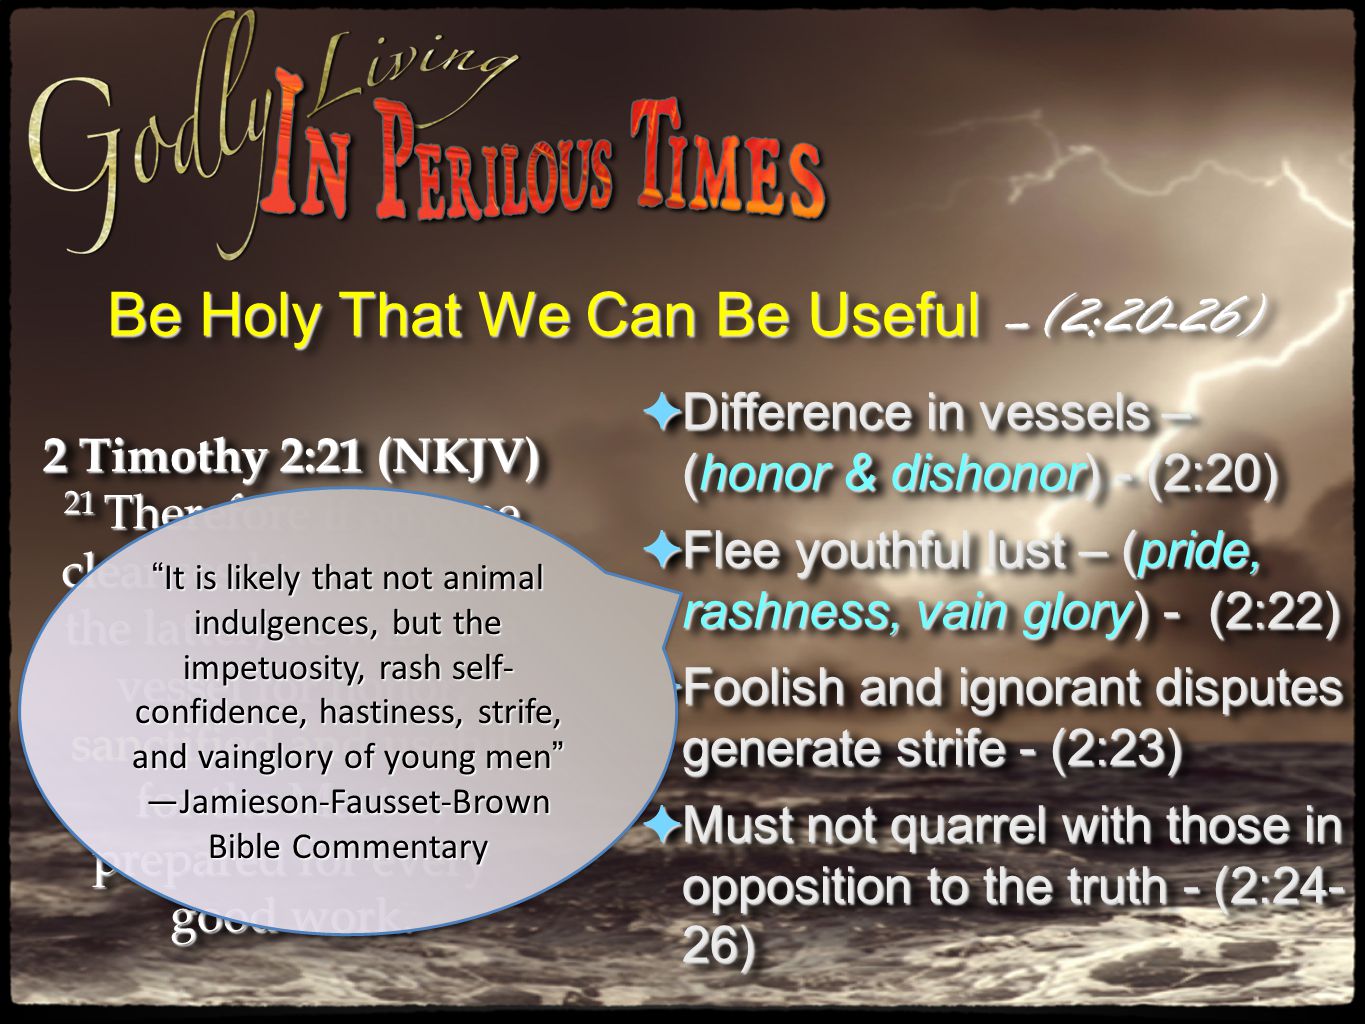 ✦ Difference in vessels – (honor & dishonor) - (2:20) ✦ Flee youthful lust – (pride, rashness, vain glory) - (2:22) ✦ Foolish and ignorant disputes generate strife - (2:23) ✦ Must not quarrel with those in opposition to the truth - (2:24- 26) ✦ Difference in vessels – (honor & dishonor) - (2:20) ✦ Flee youthful lust – (pride, rashness, vain glory) - (2:22) ✦ Foolish and ignorant disputes generate strife - (2:23) ✦ Must not quarrel with those in opposition to the truth - (2:24- 26) Be Holy That We Can Be Useful –(2:20-26) 2 Timothy 2:21 (NKJV) 21 Therefore if anyone cleanses himself from the latter, he will be a vessel for honor, sanctified and useful for the Master, prepared for every good work.